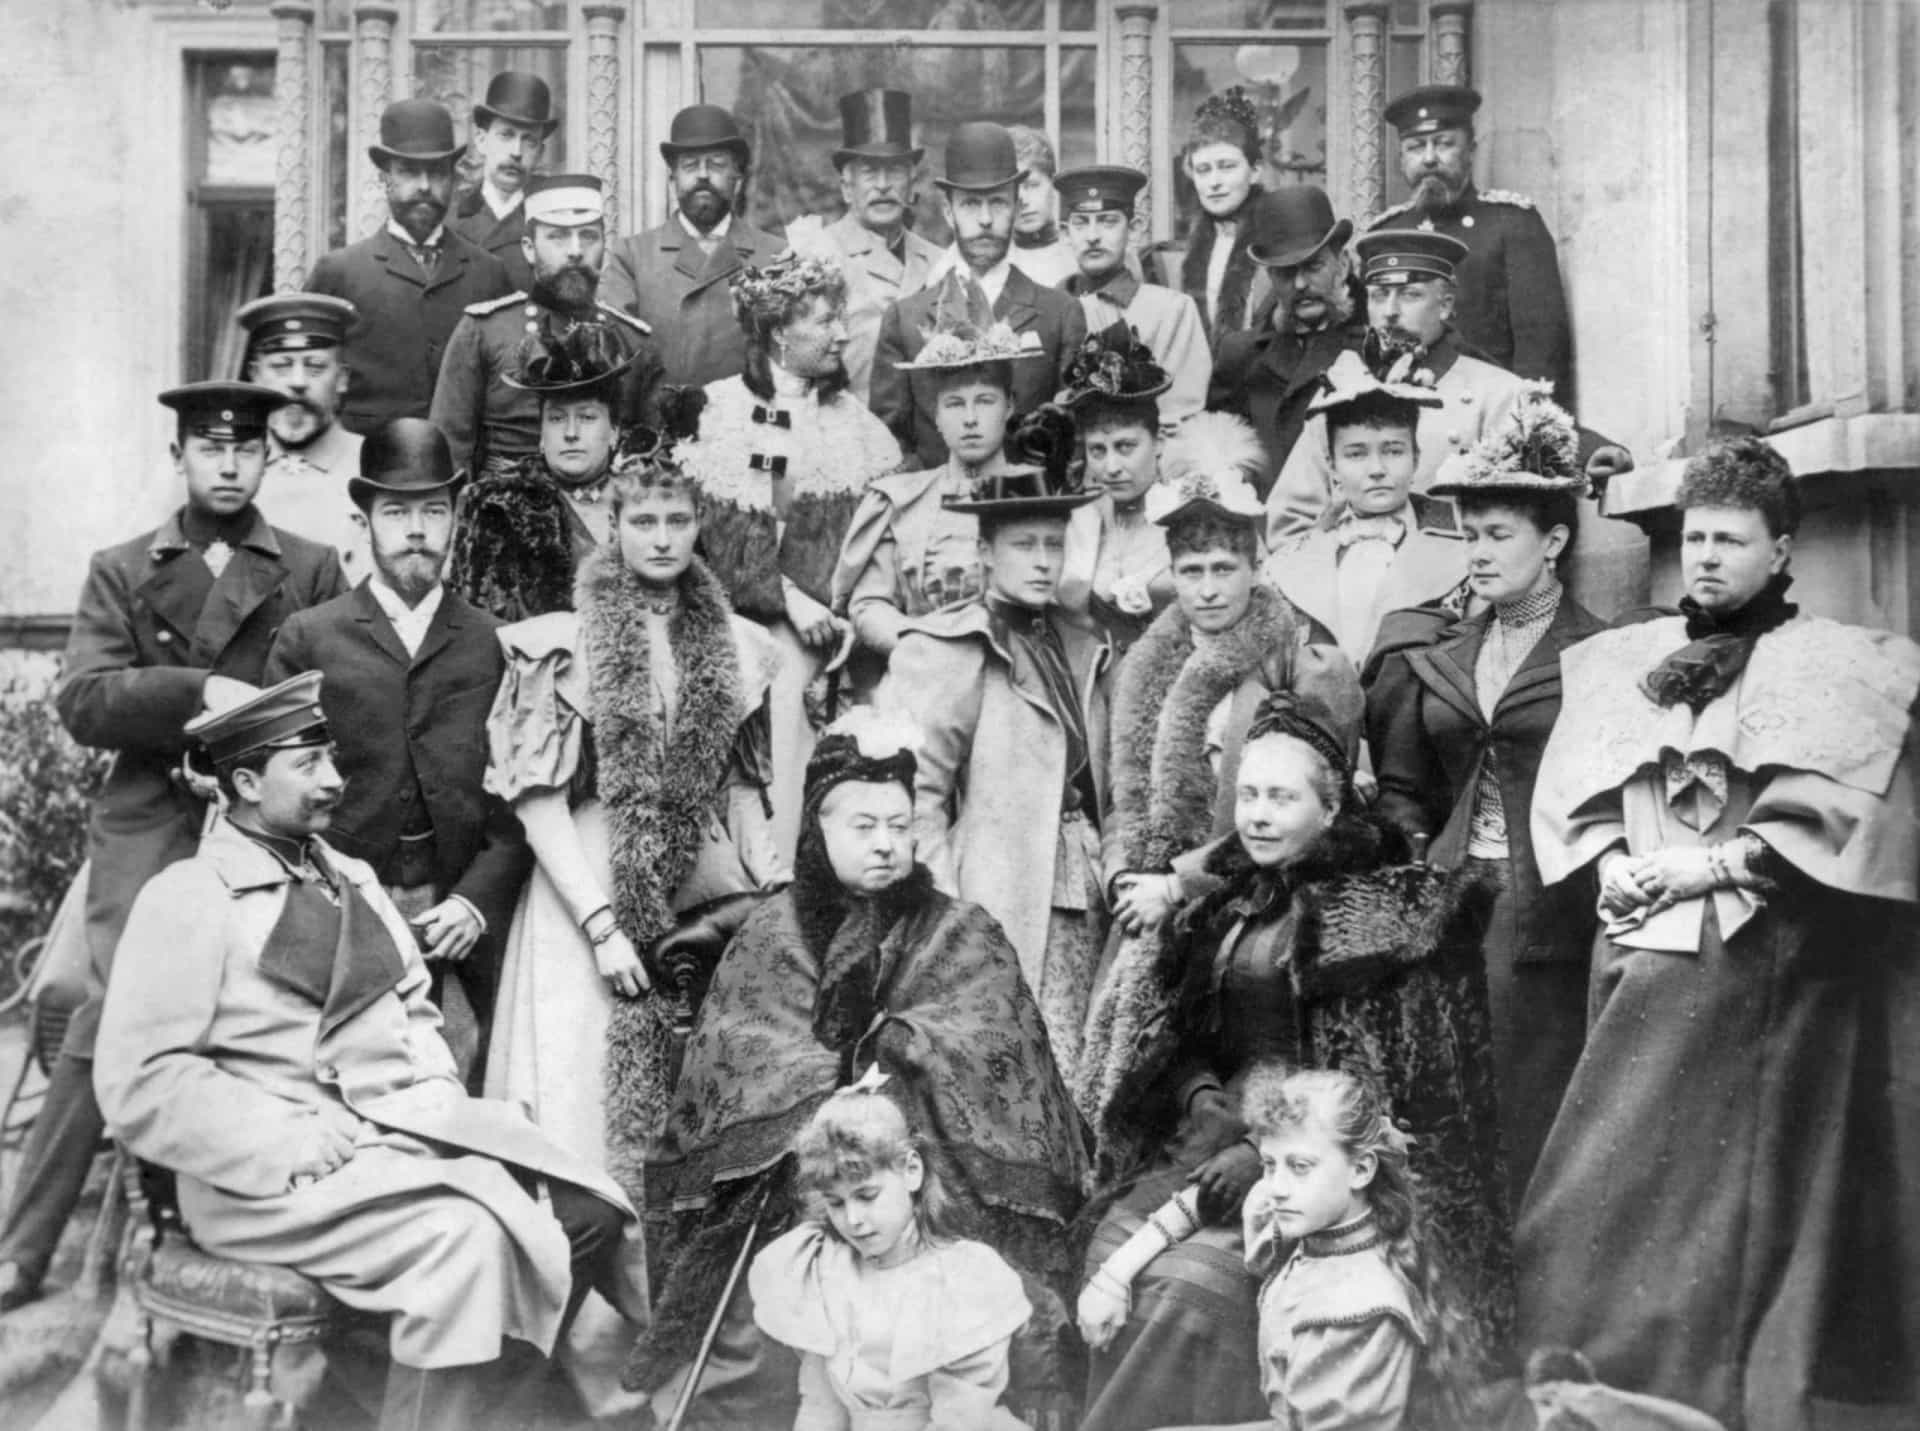 <p>By the 1880s, Queen Victoria had successfully married all of her children into powerful royal families across Europe. But sadly, it didn't quite achieve the peace and unity she had hoped for.</p>